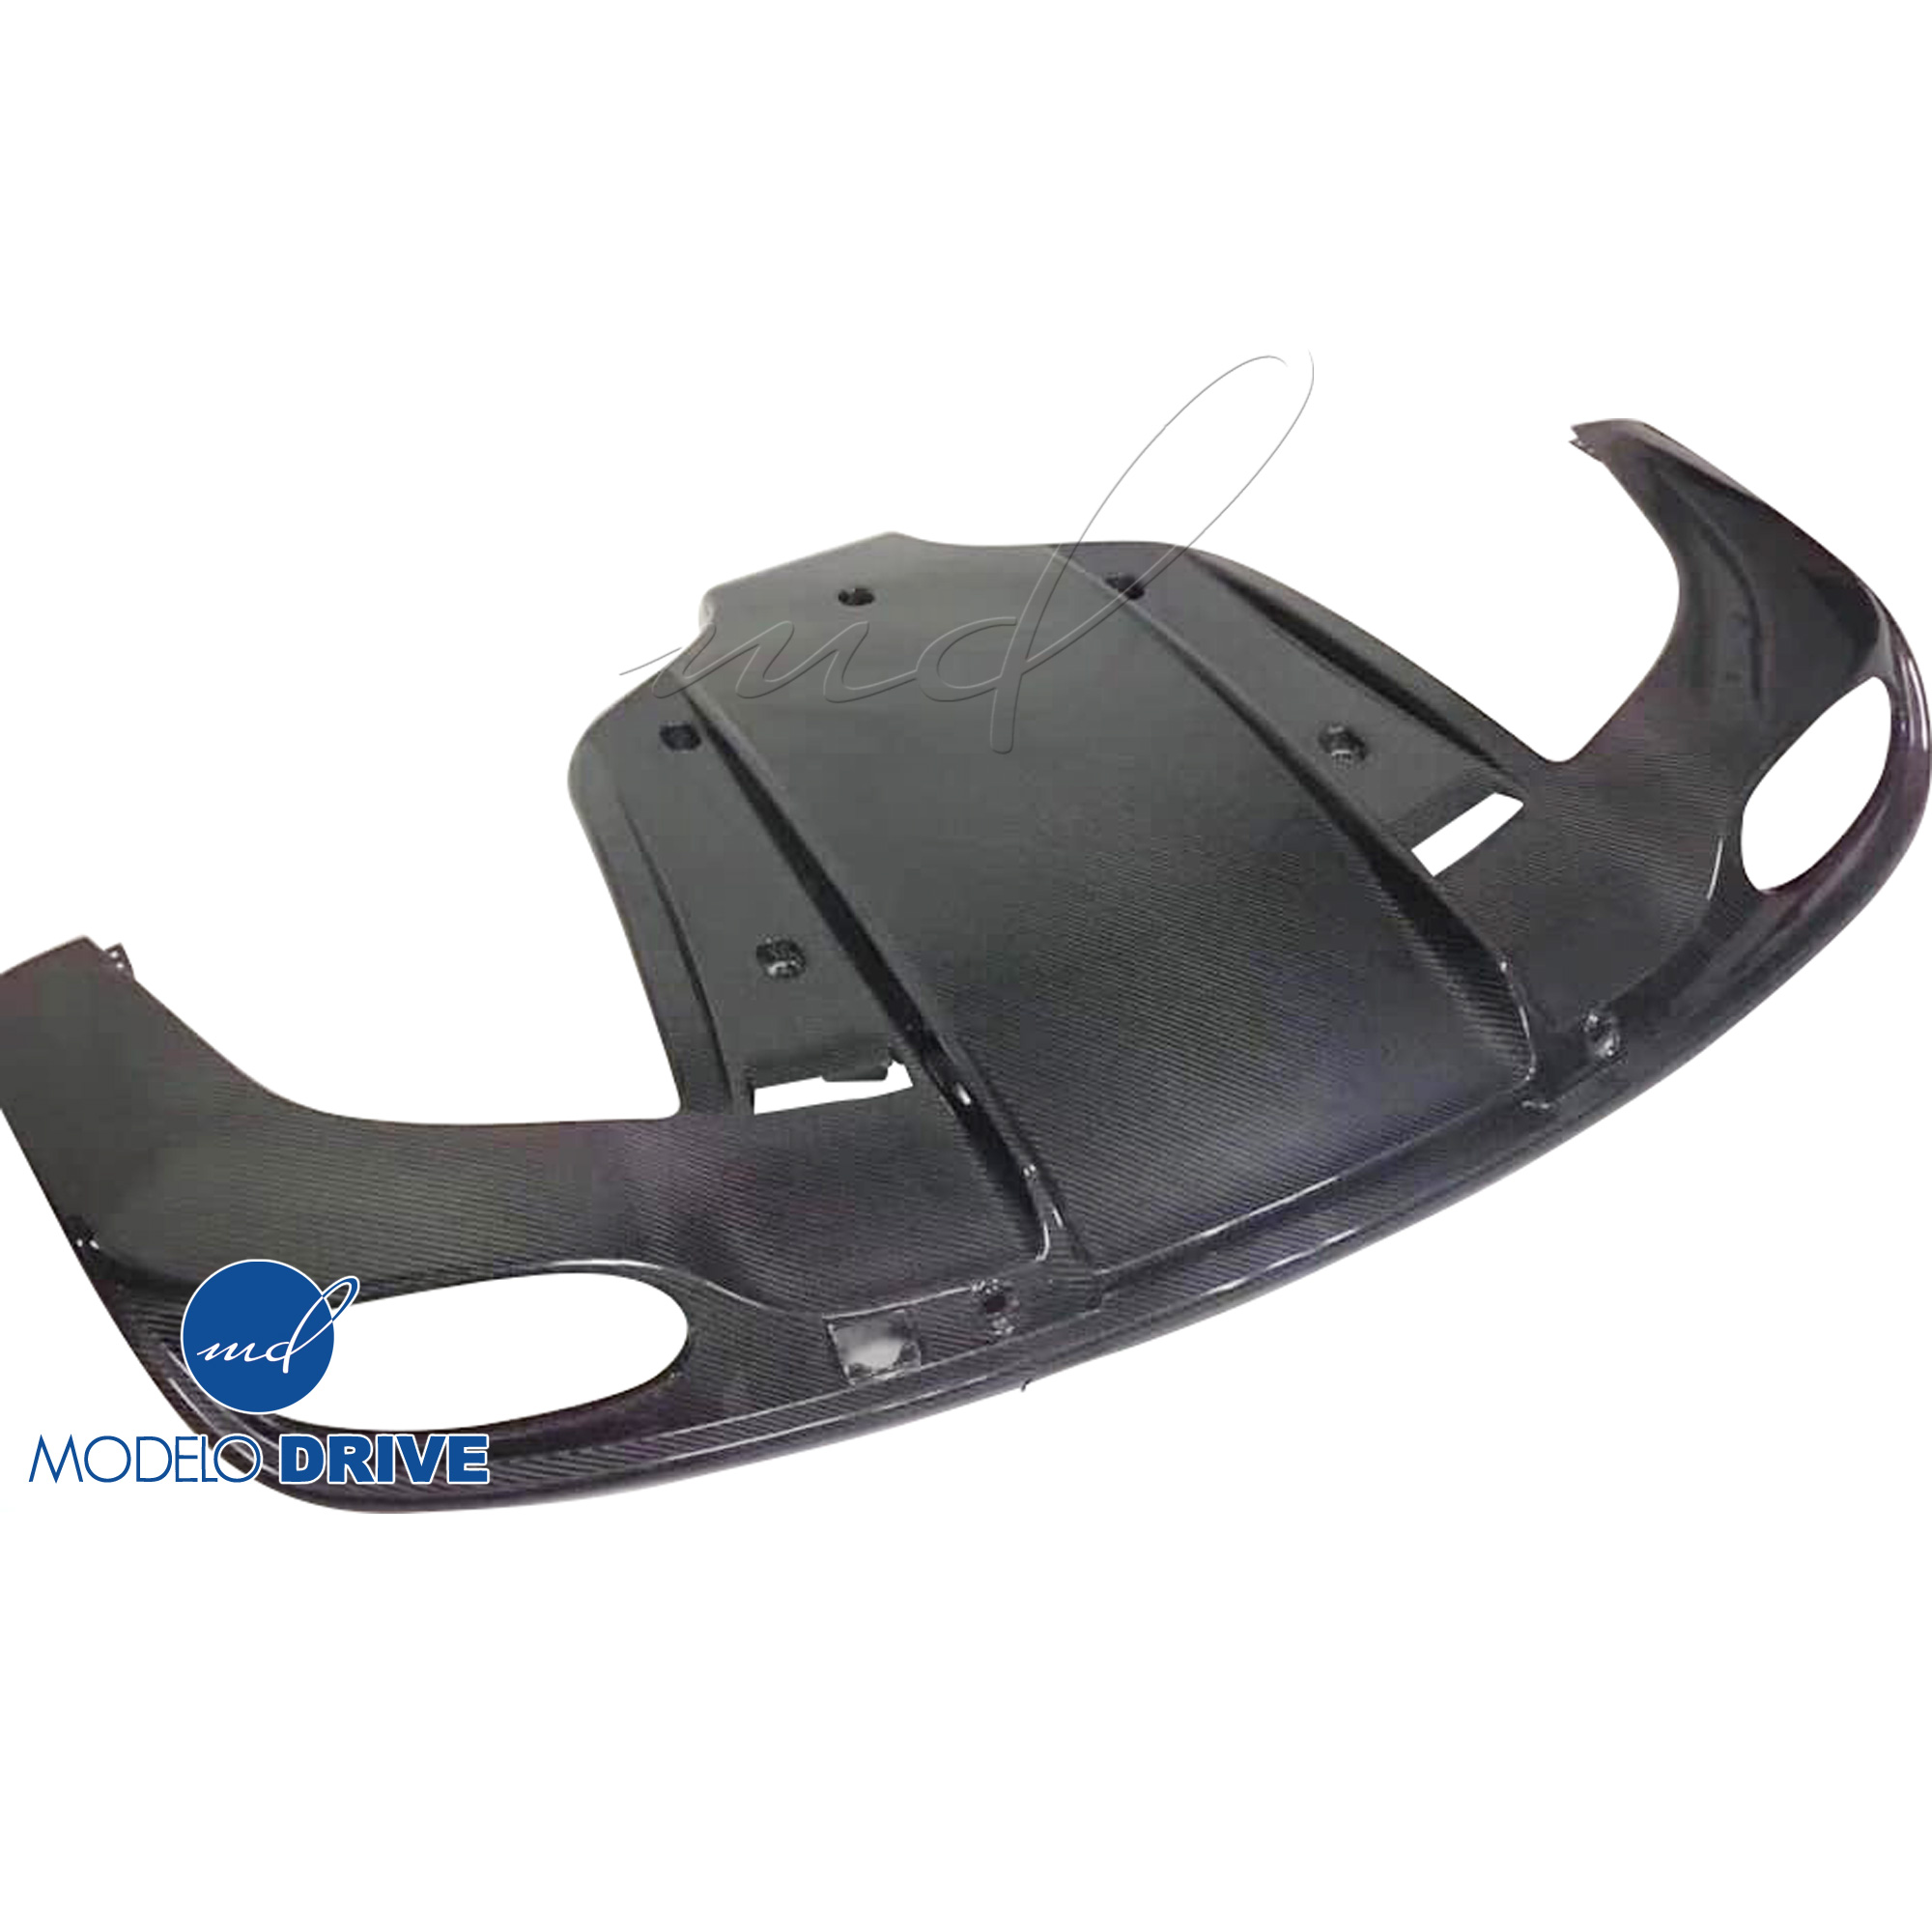 ModeloDrive Carbon Fiber MULL Rear Diffuser > Bentley Continental GT GTC 2011-2018 > 2dr Coupe - Image 13